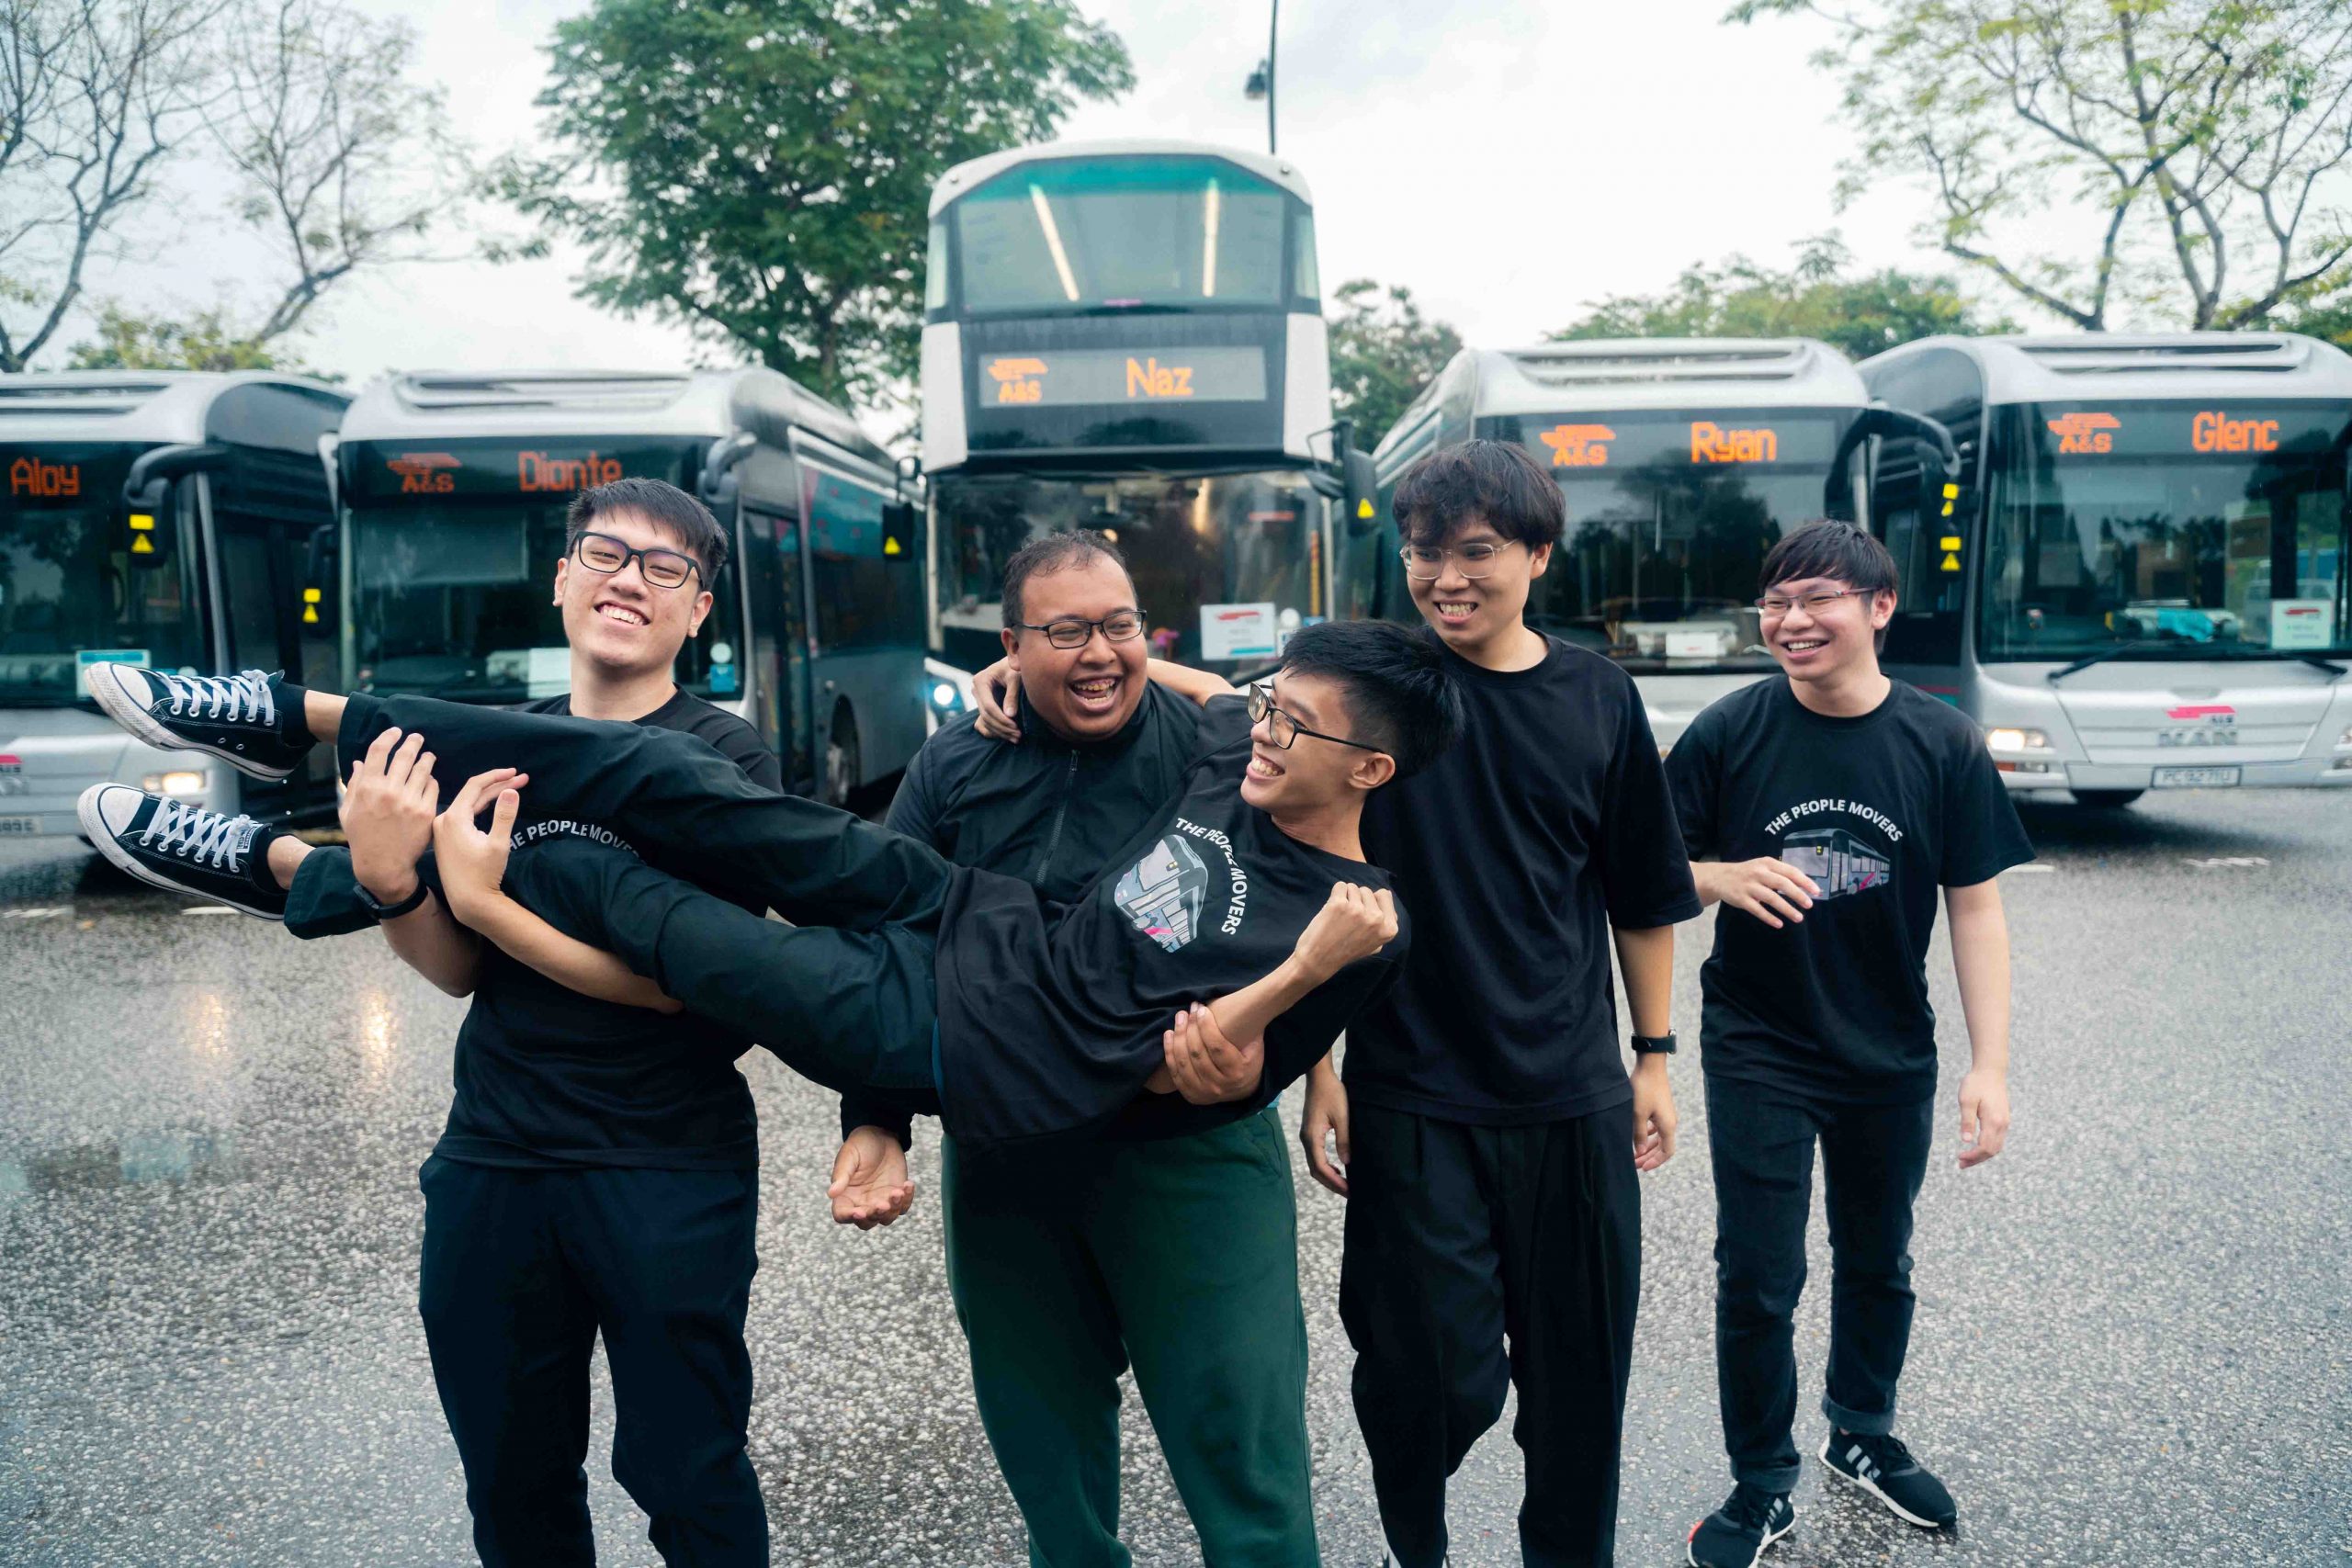 Society Doubts Them but That’s Not Stopping These 20-Something Bus Captain Uncles